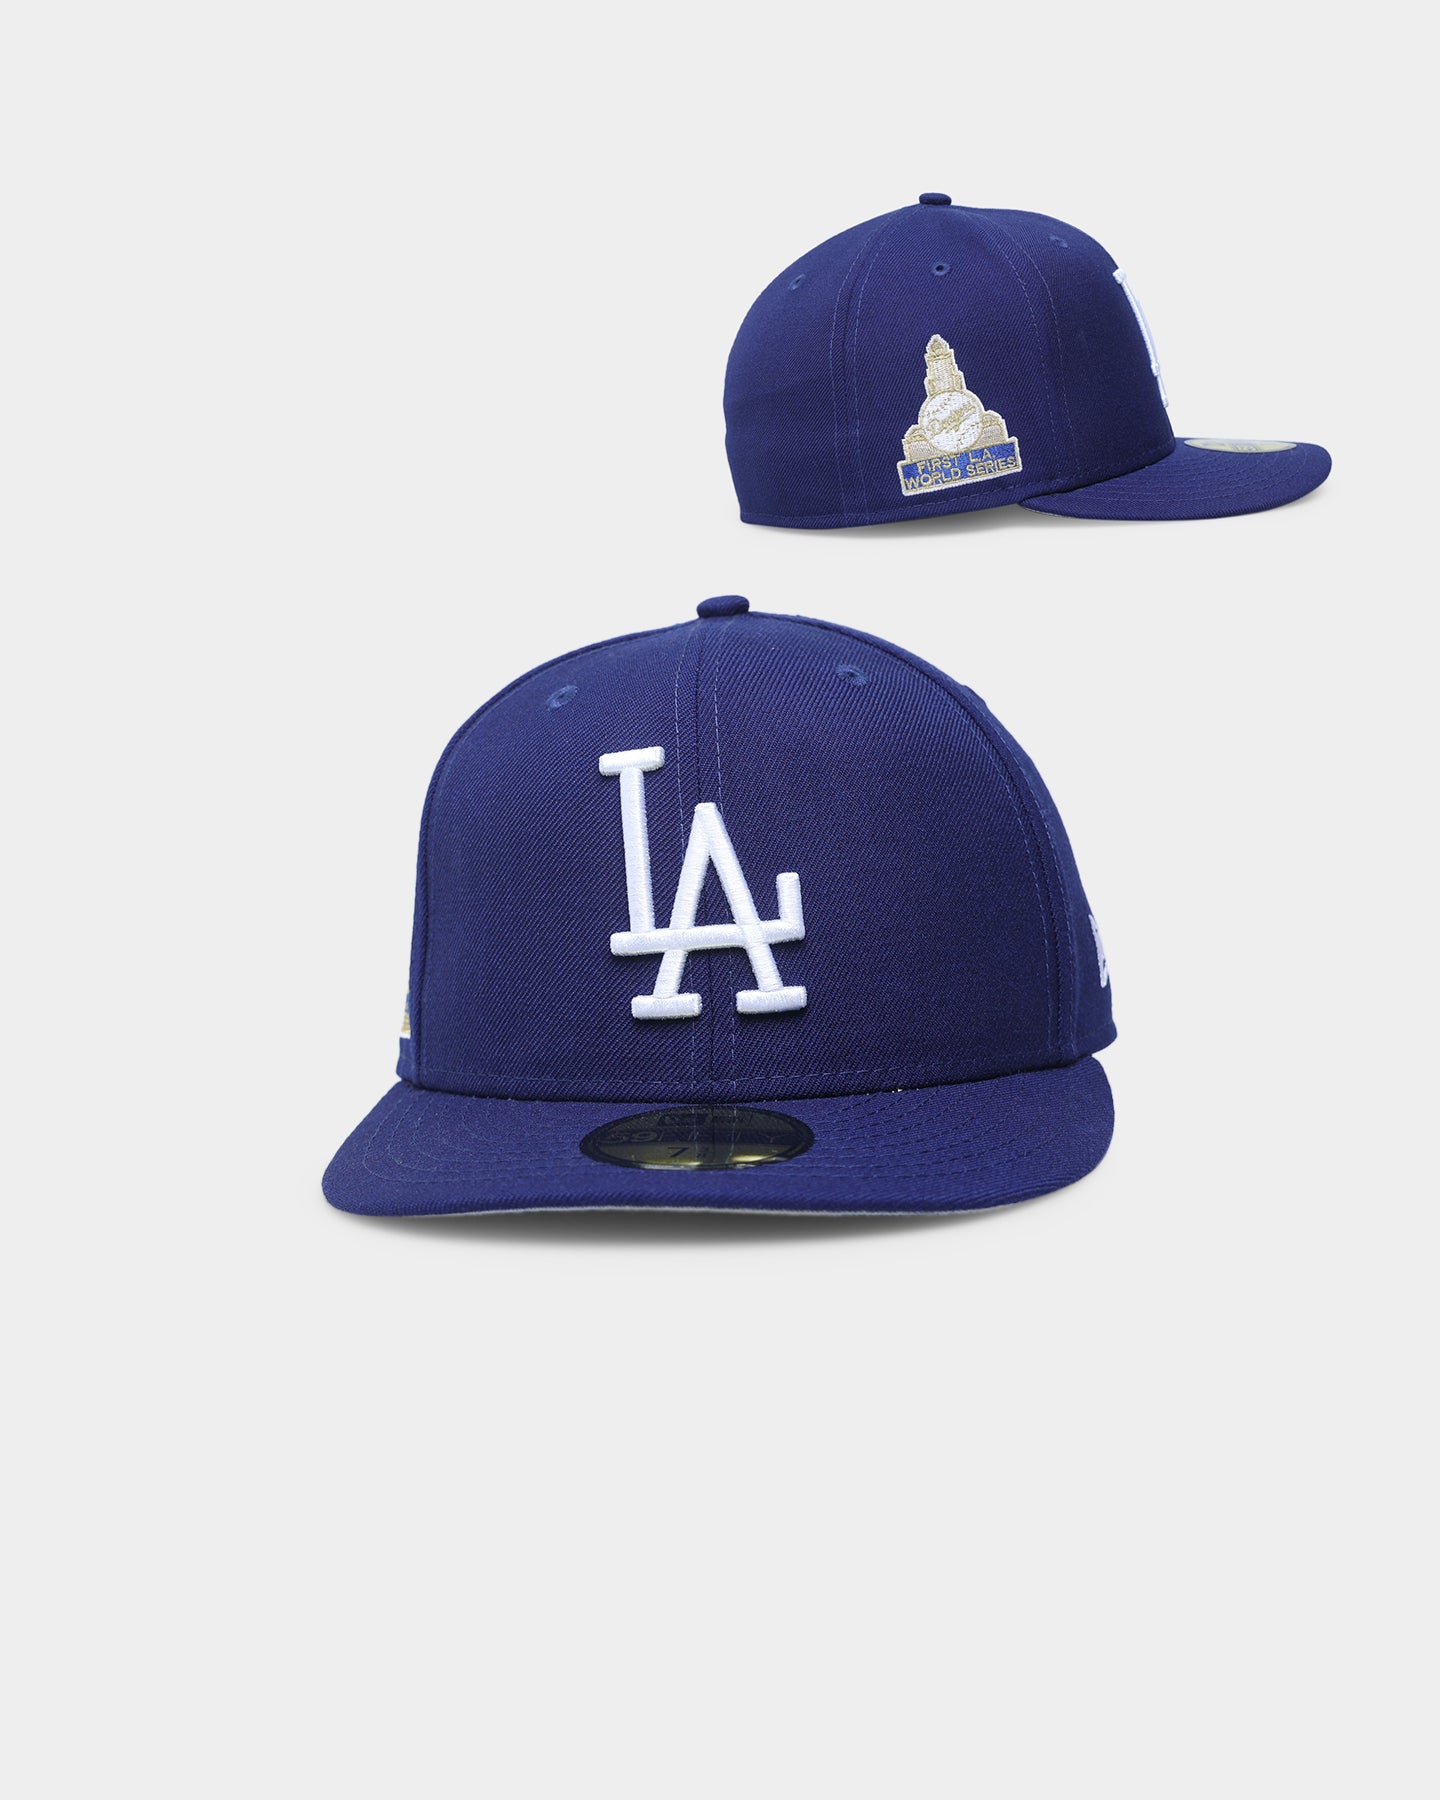 1959 First LA World Series” Dodgers hat from Culture Kings! : r/neweracaps